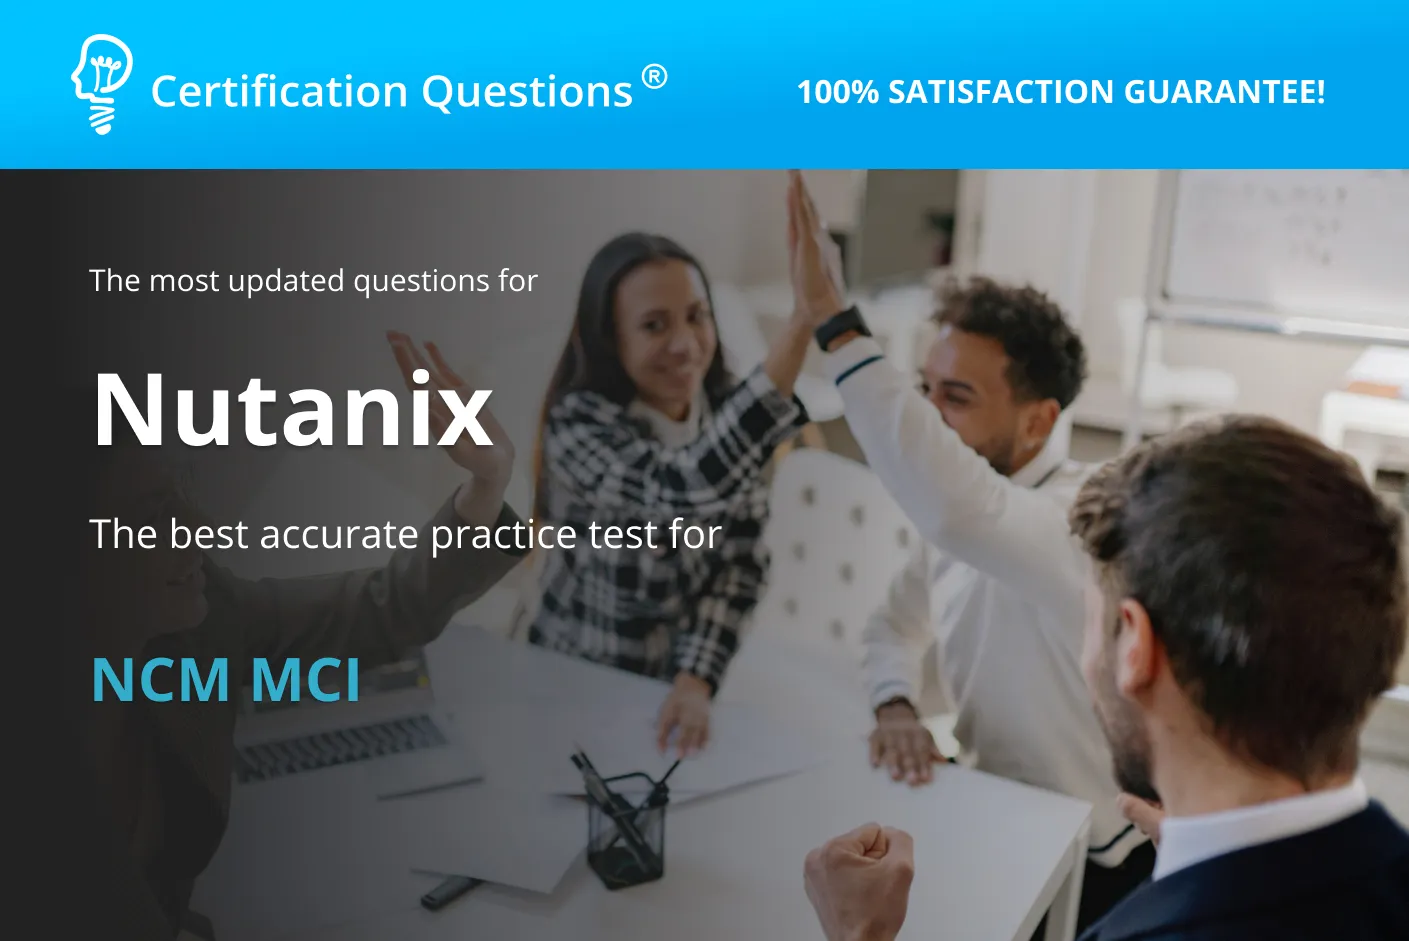 This guide is related to Nutanix NCM MCI Test in the USA